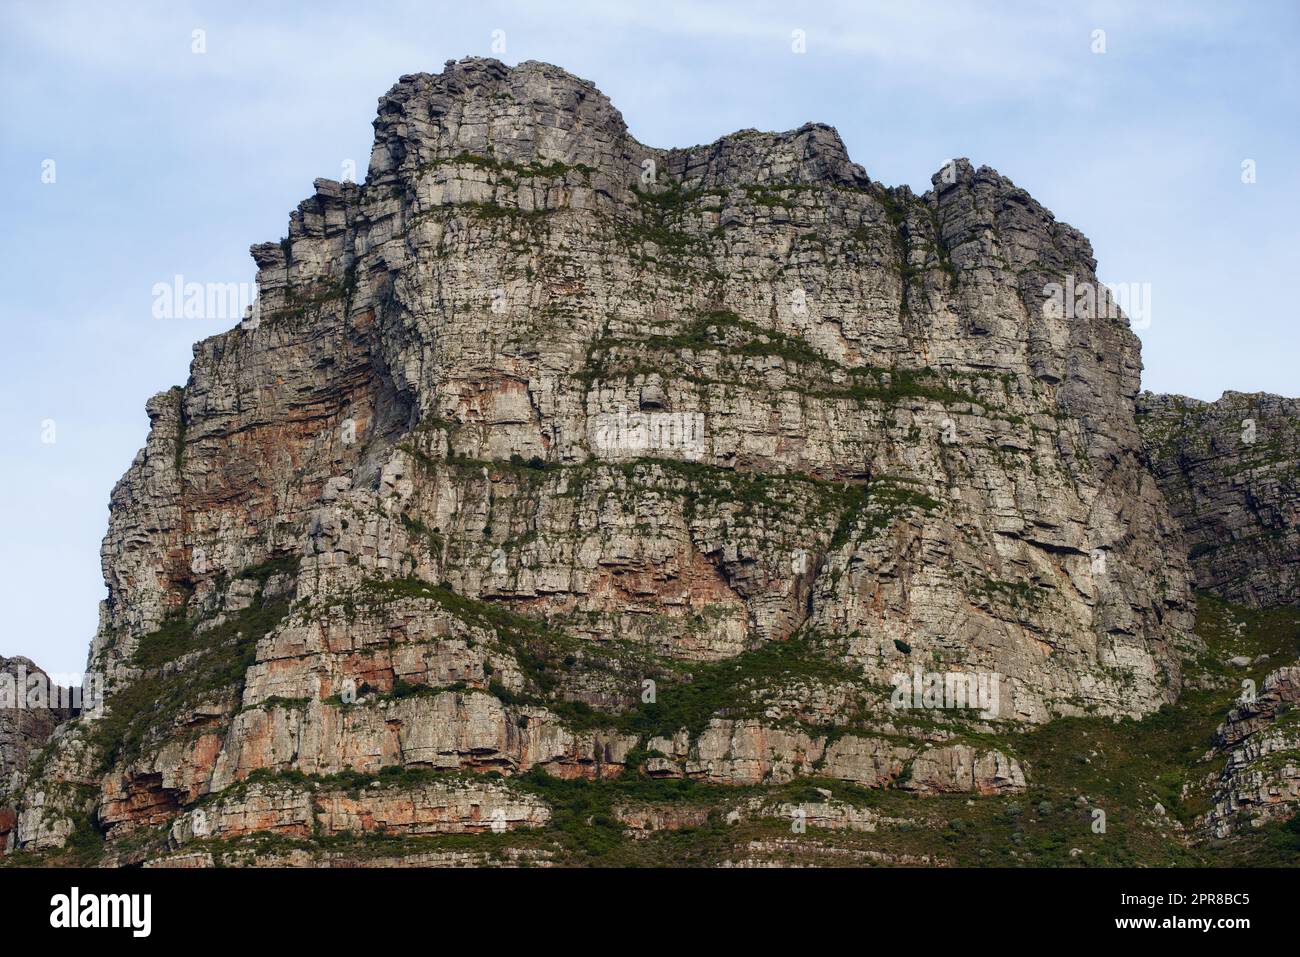 Panorama view of Lions Head mountain in Cape Town, South Africa during summer holiday and vacation. Scenic landscape of rock and texture hill in a remote hiking area against blue sky. Stock Photo